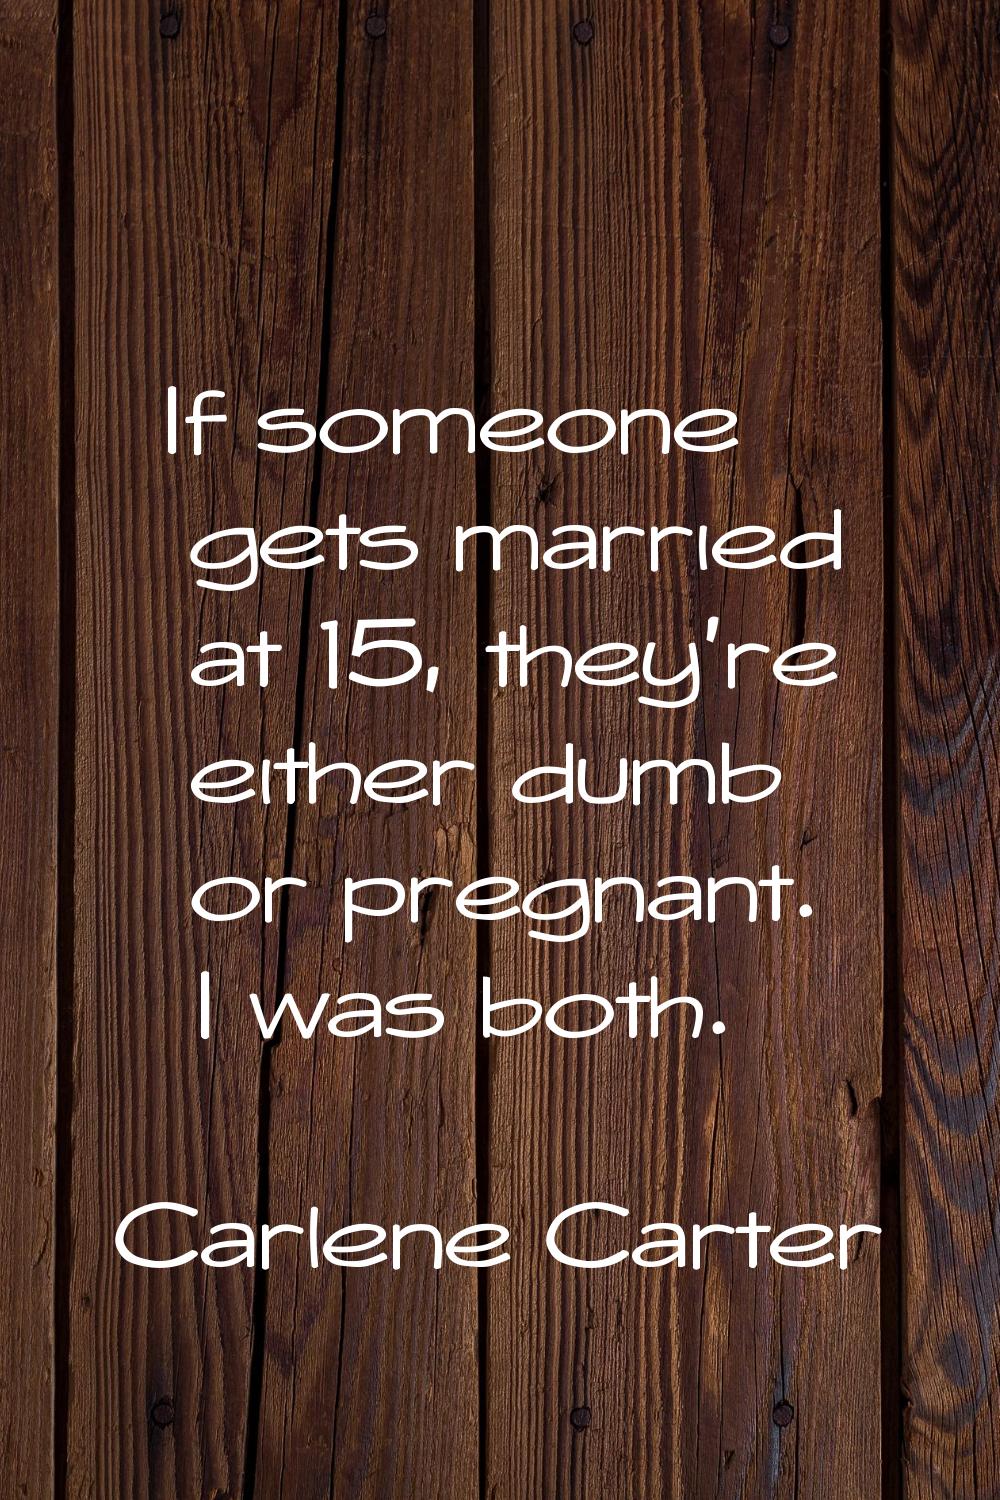 If someone gets married at 15, they're either dumb or pregnant. I was both.